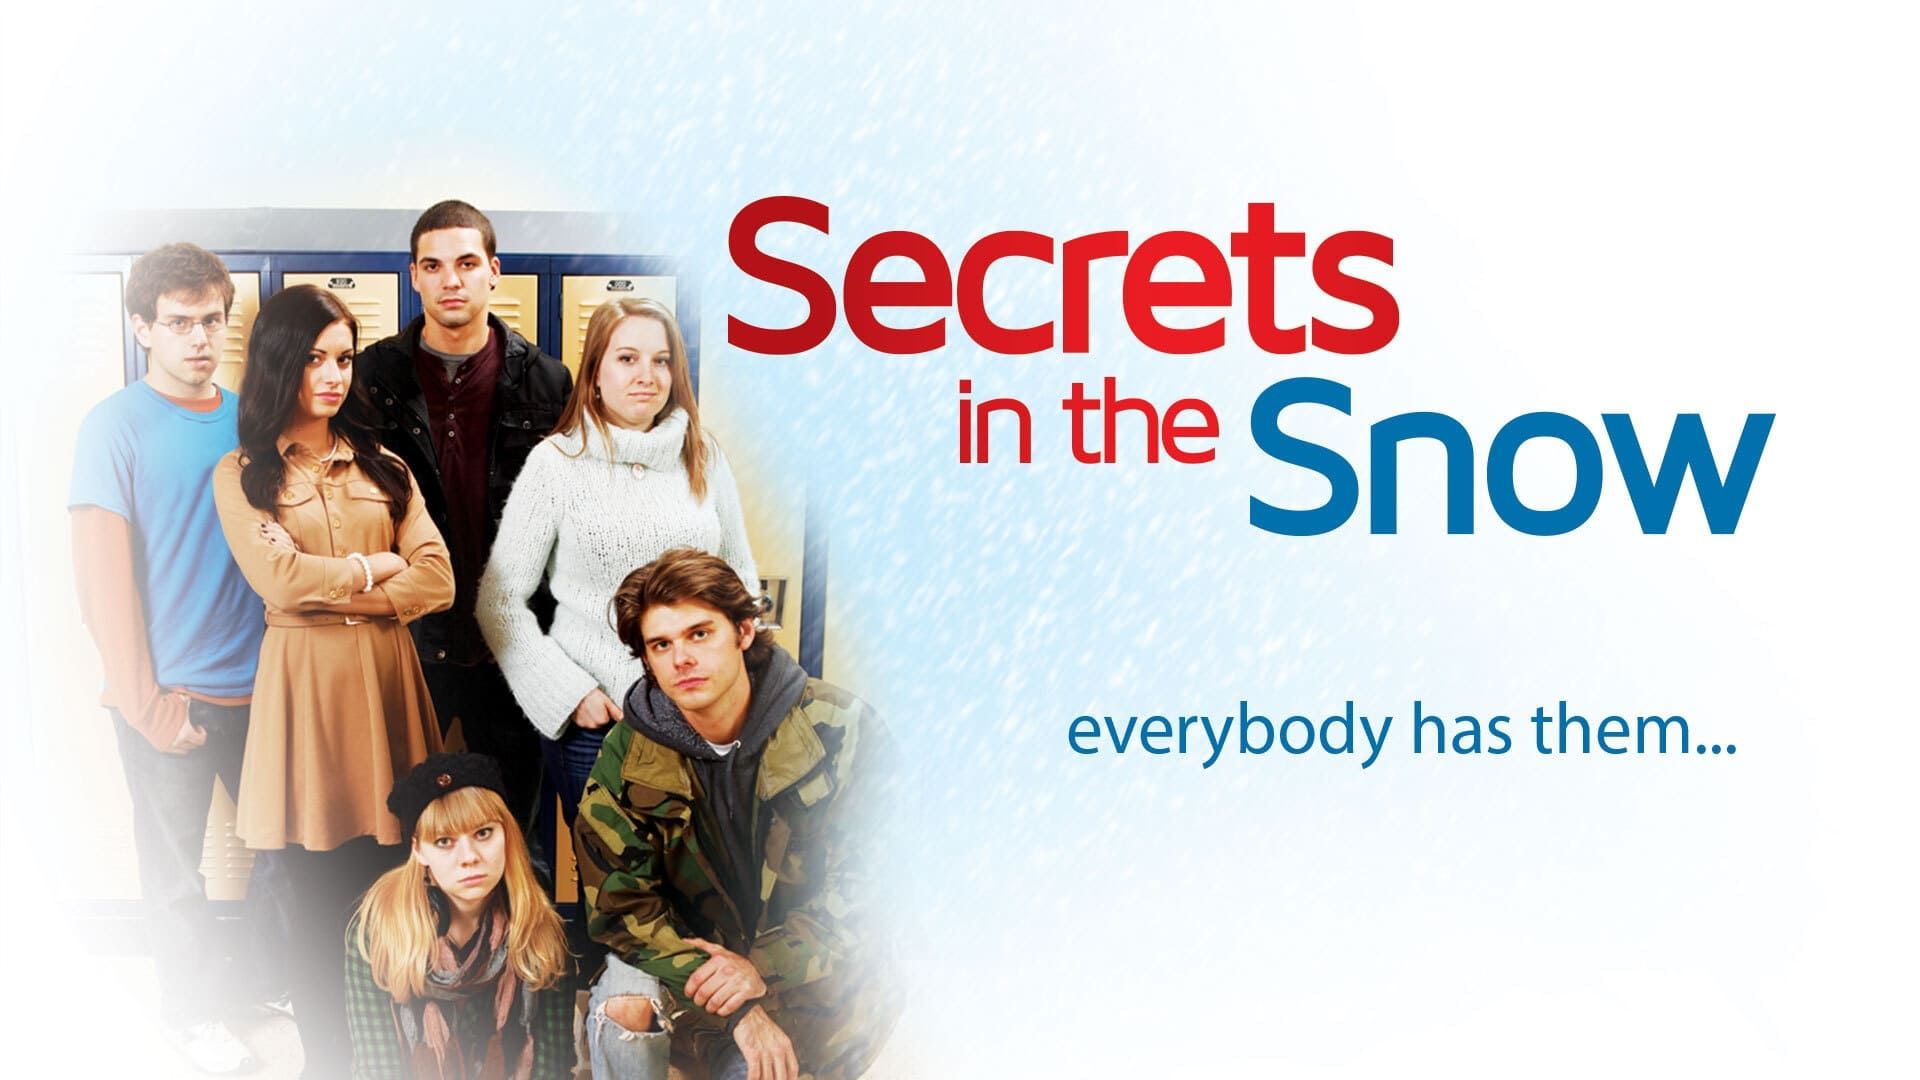 Secrets in the Snow background